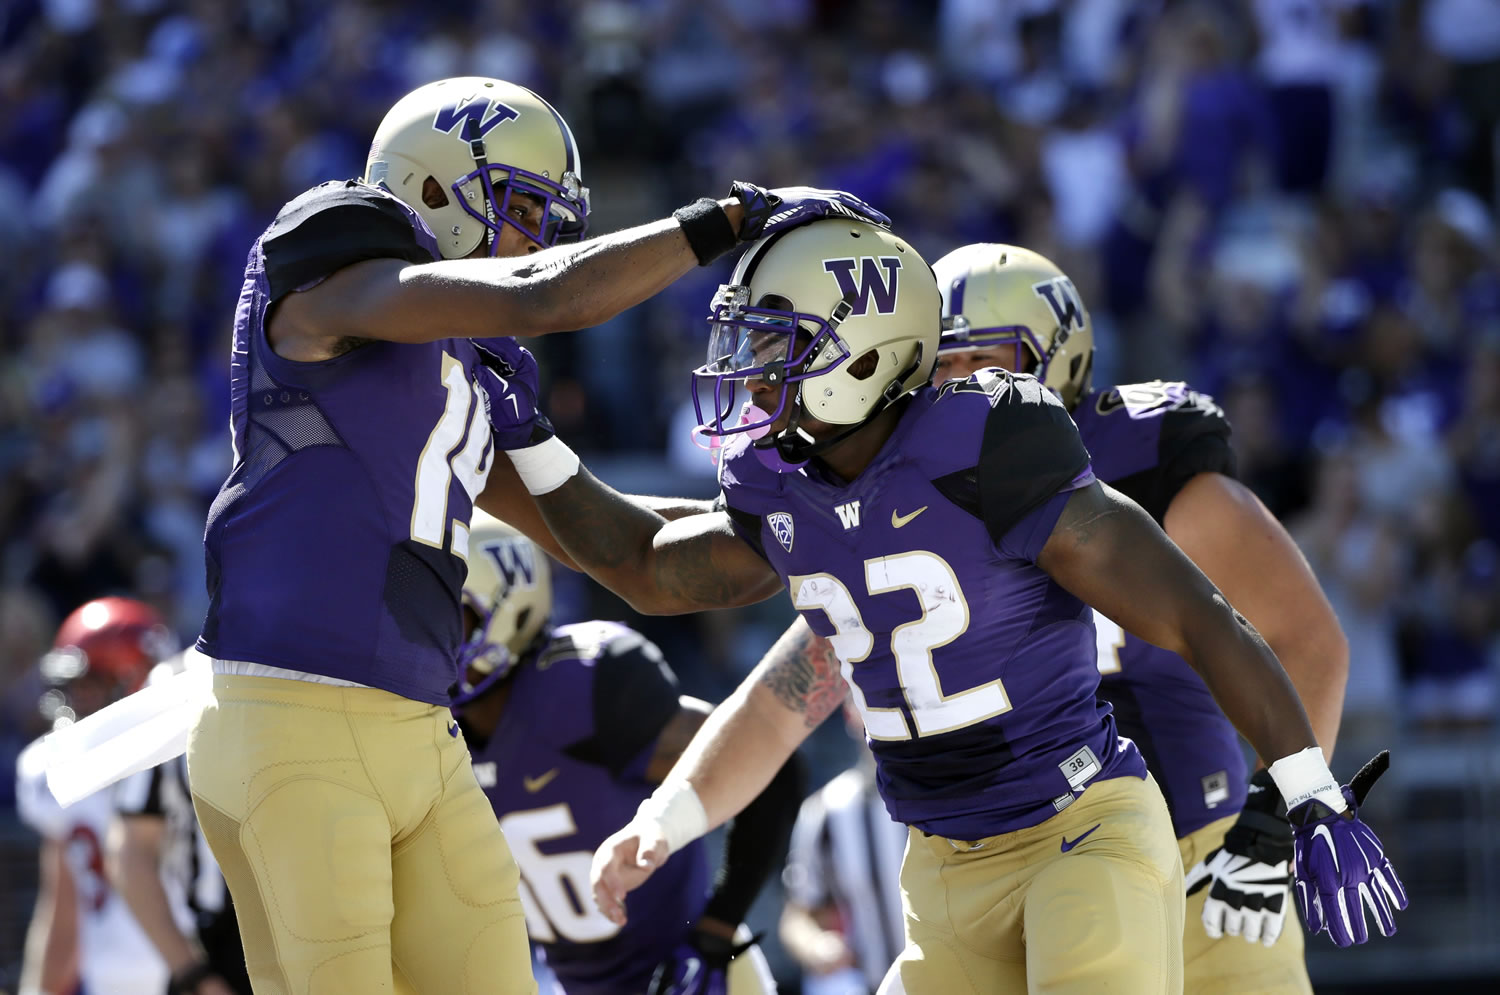 Washington Huskies running back Lavon Coleman (22) is congratulated after scoring against Eastern Washington in the first half of an NCAA football game Saturday, Sept. 6, 2014, in Seattle.